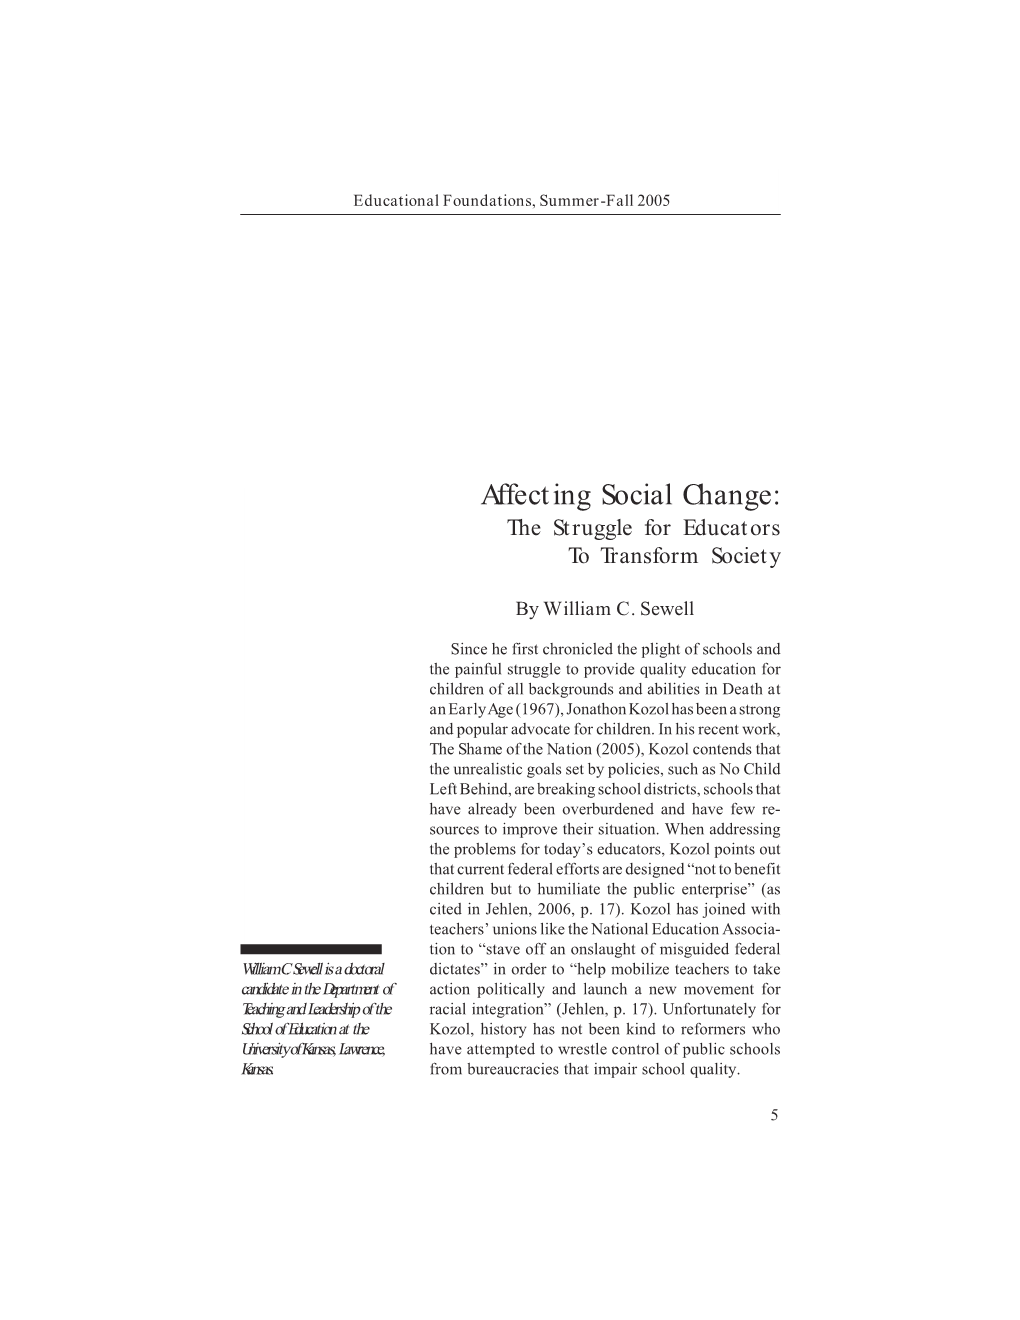 Affecting Social Change: the Struggle for Educators to Transform Society